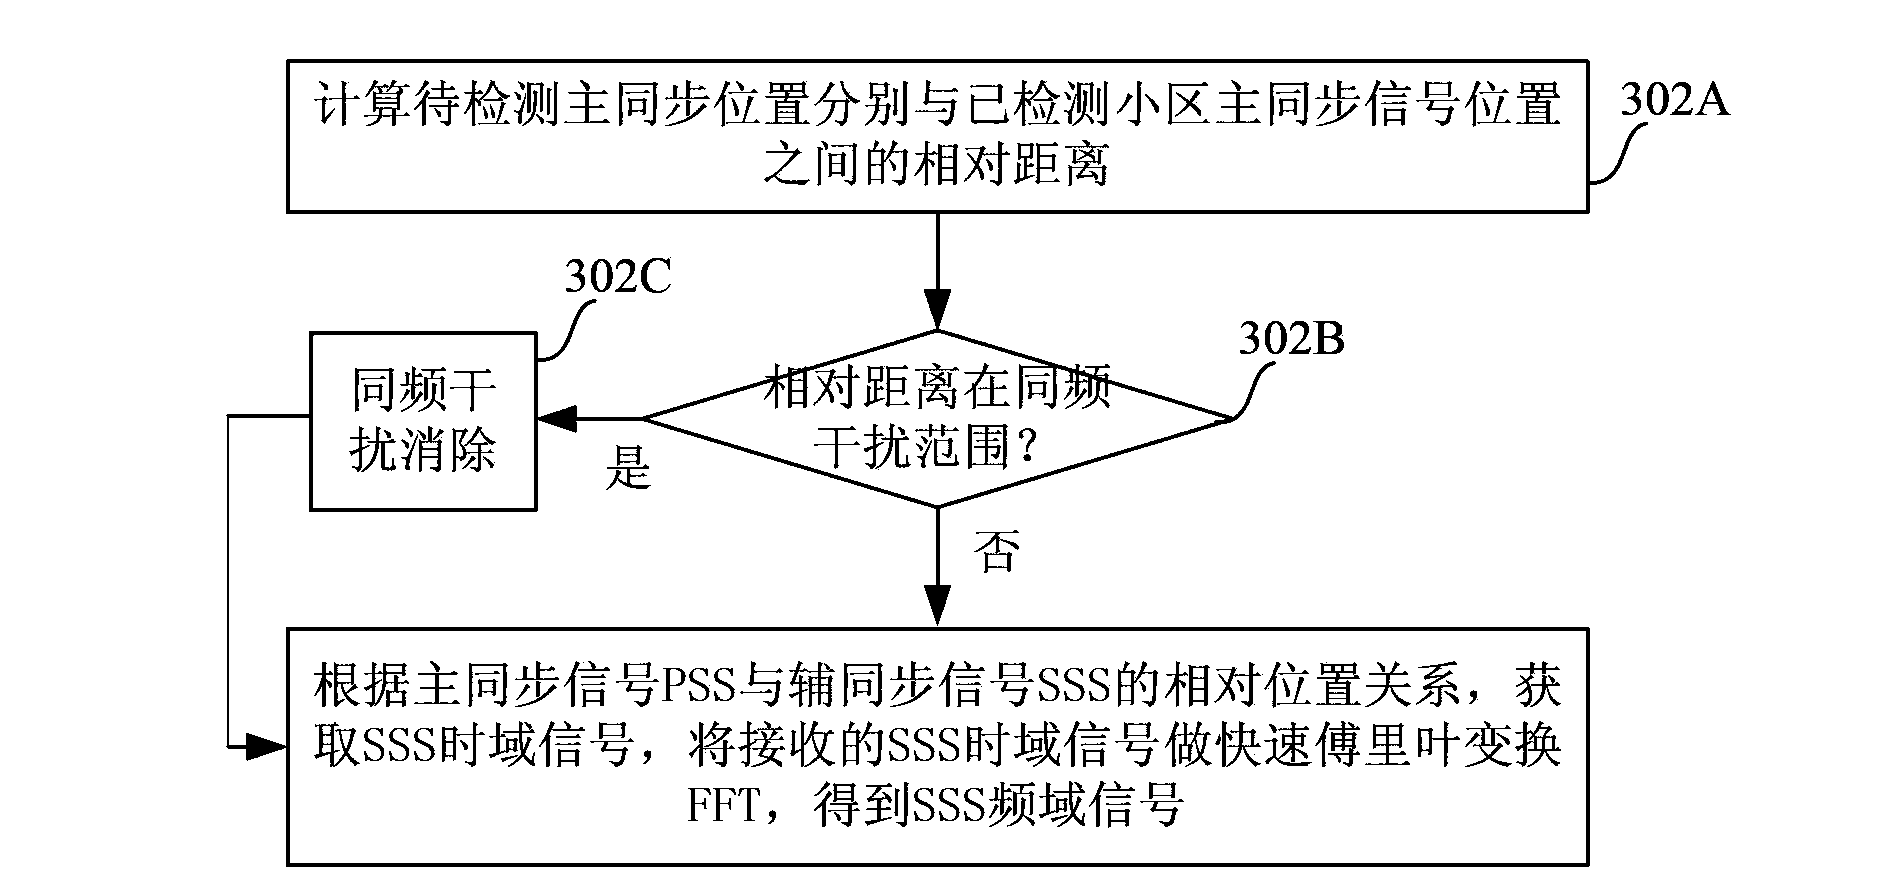 LTE system cell detection method